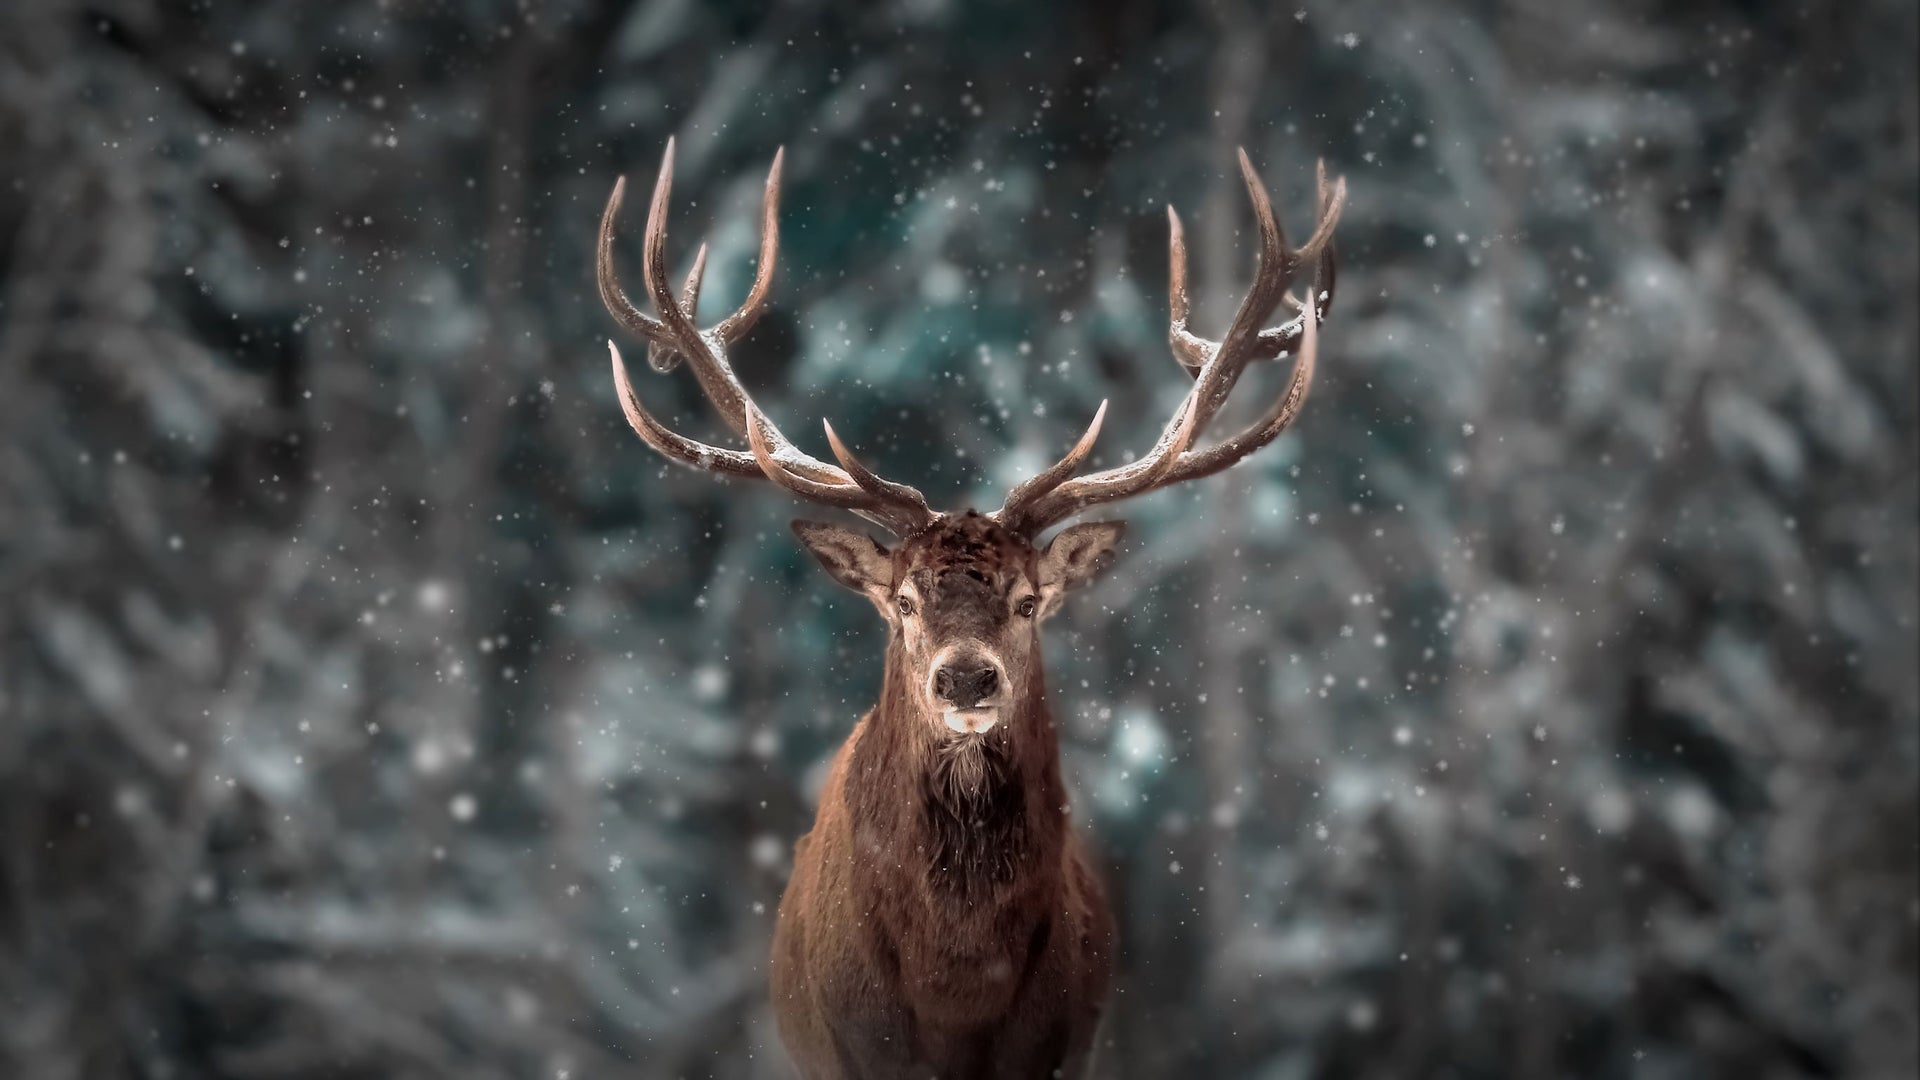 Noble male deer in snowy forest. - Crosscountrycreations